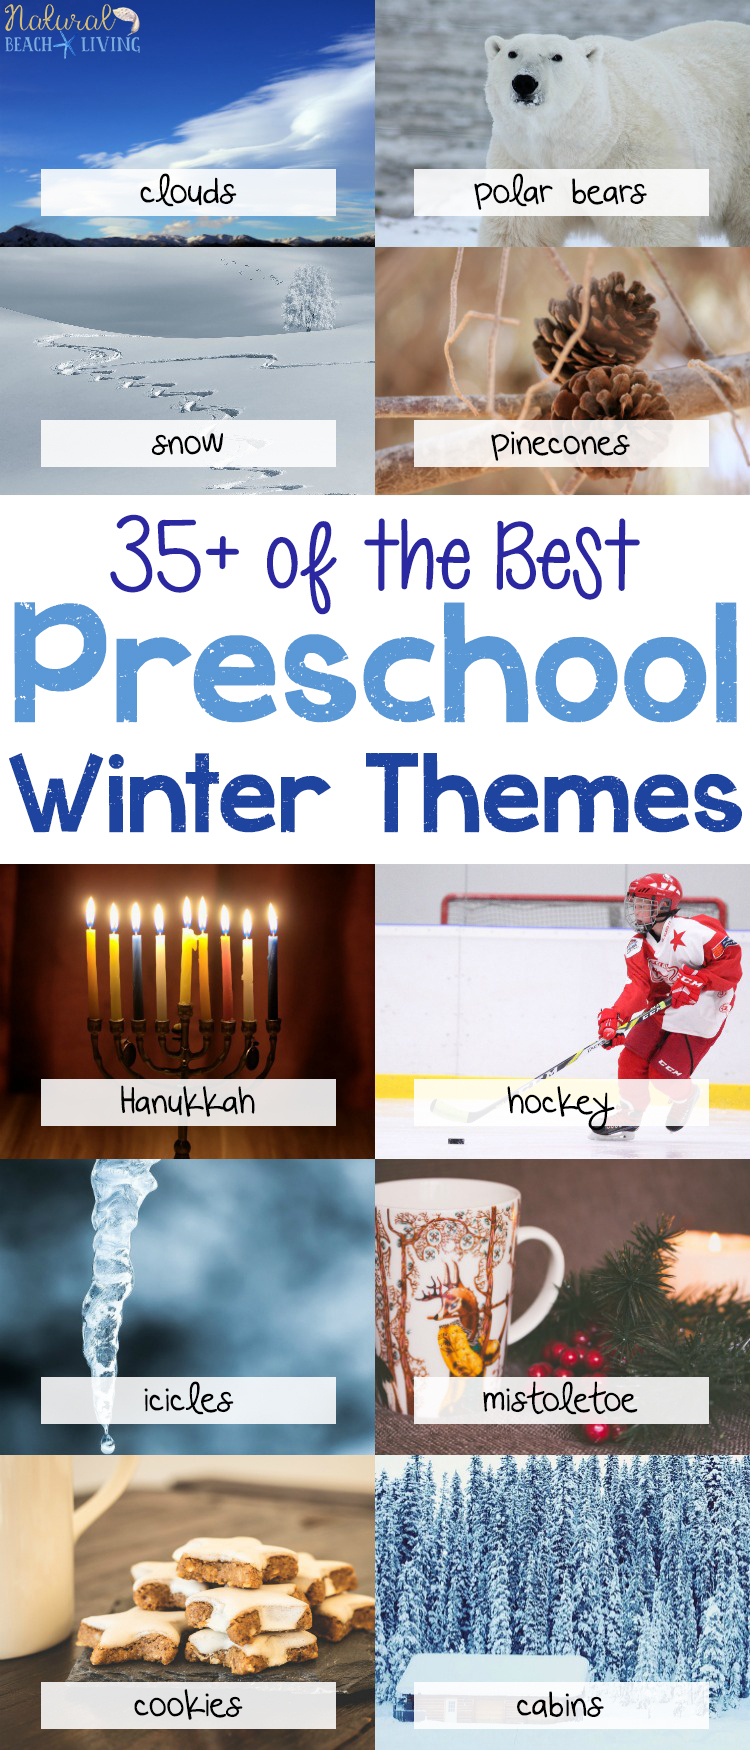 35+ Winter Preschool Themes And Lesson Plans - Natural Beach